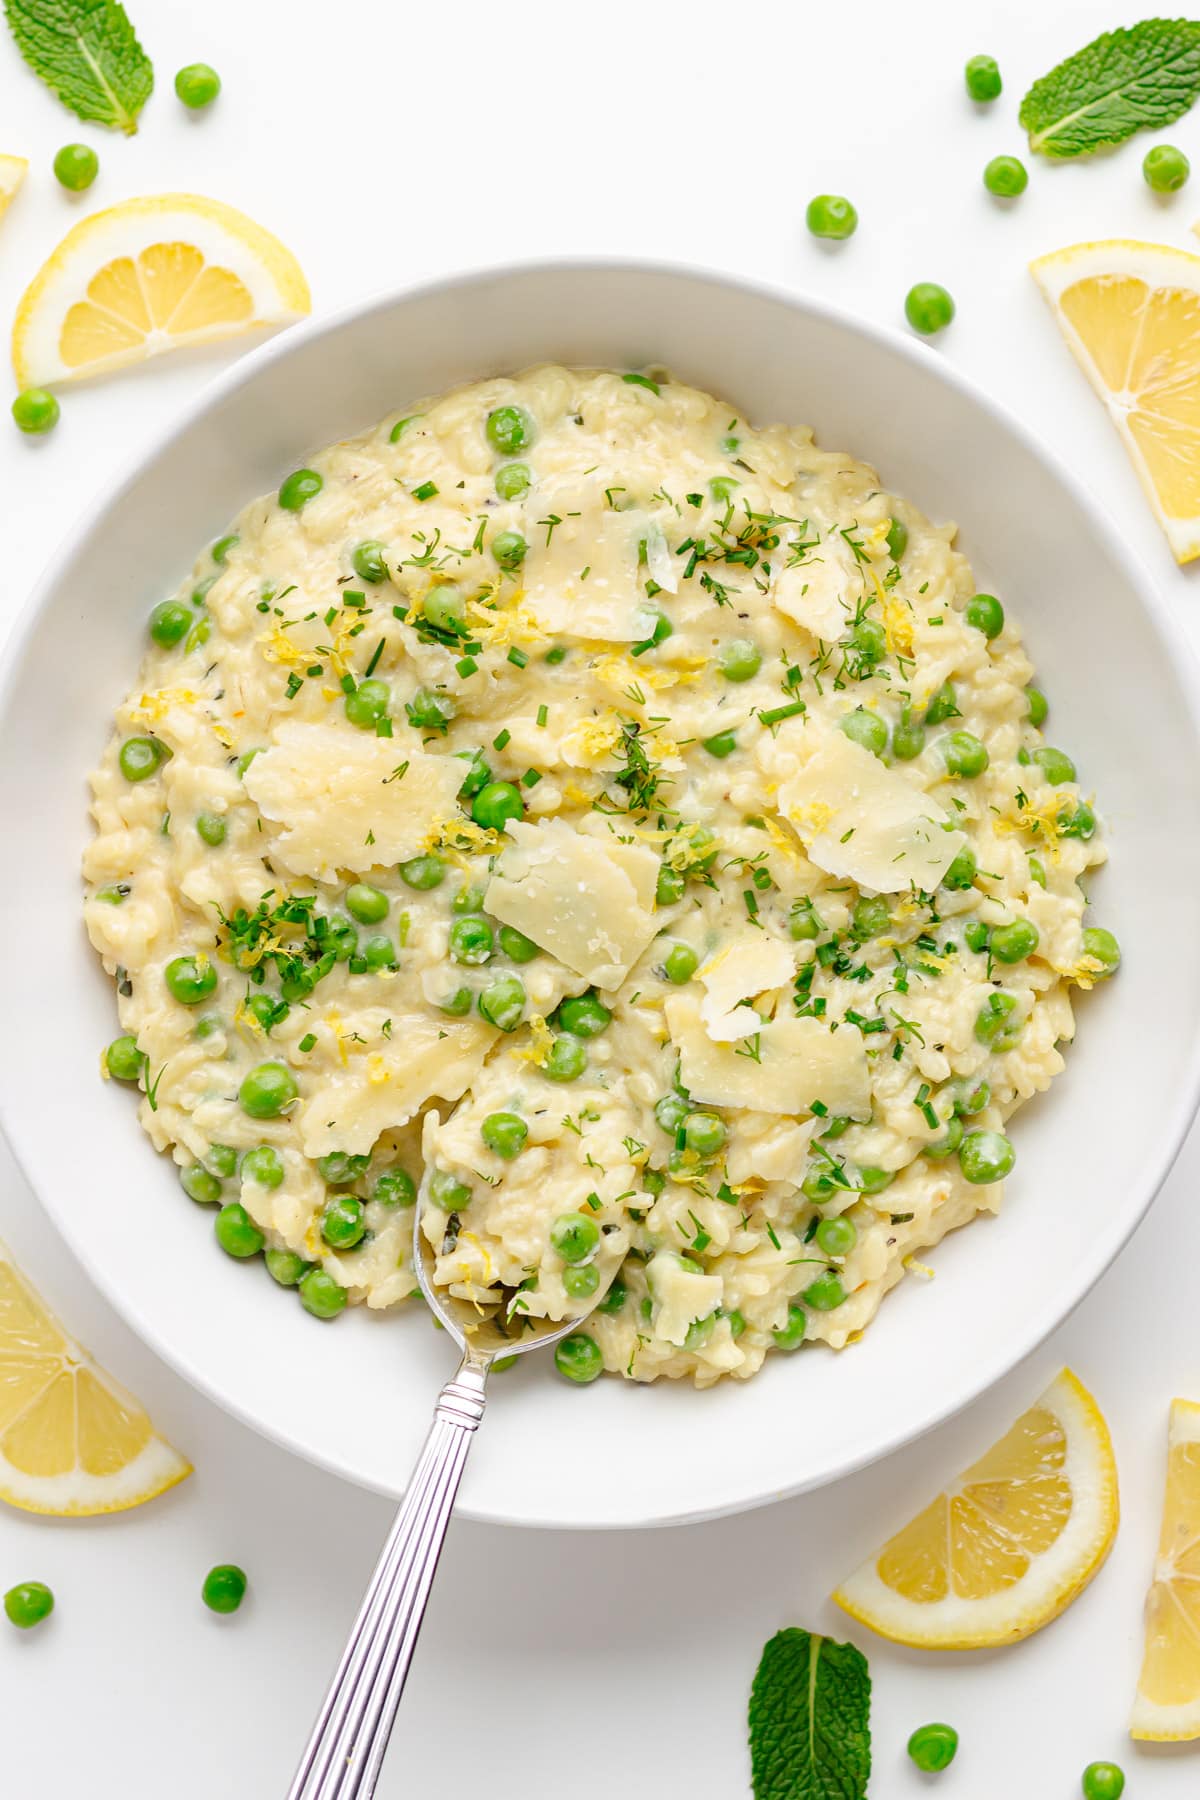 Pea risotto in a white bowl with lemon slices, peas and mint scattered around it.